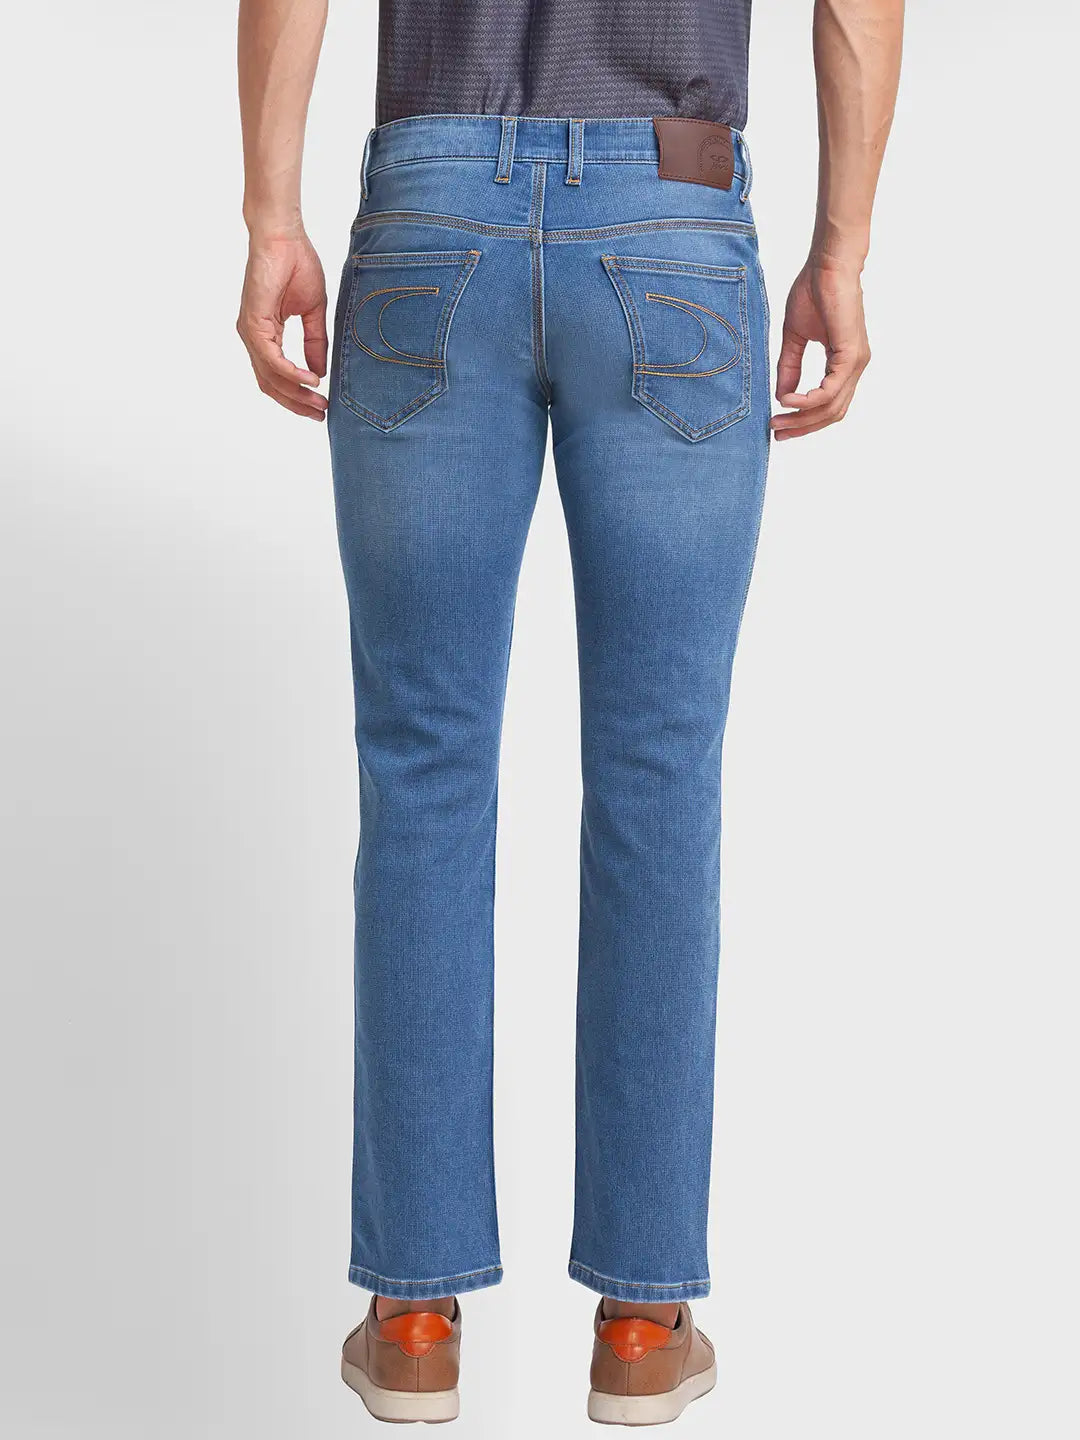 Men Blue Tapered Fit Warp Chambray Cotton Blend Jeans